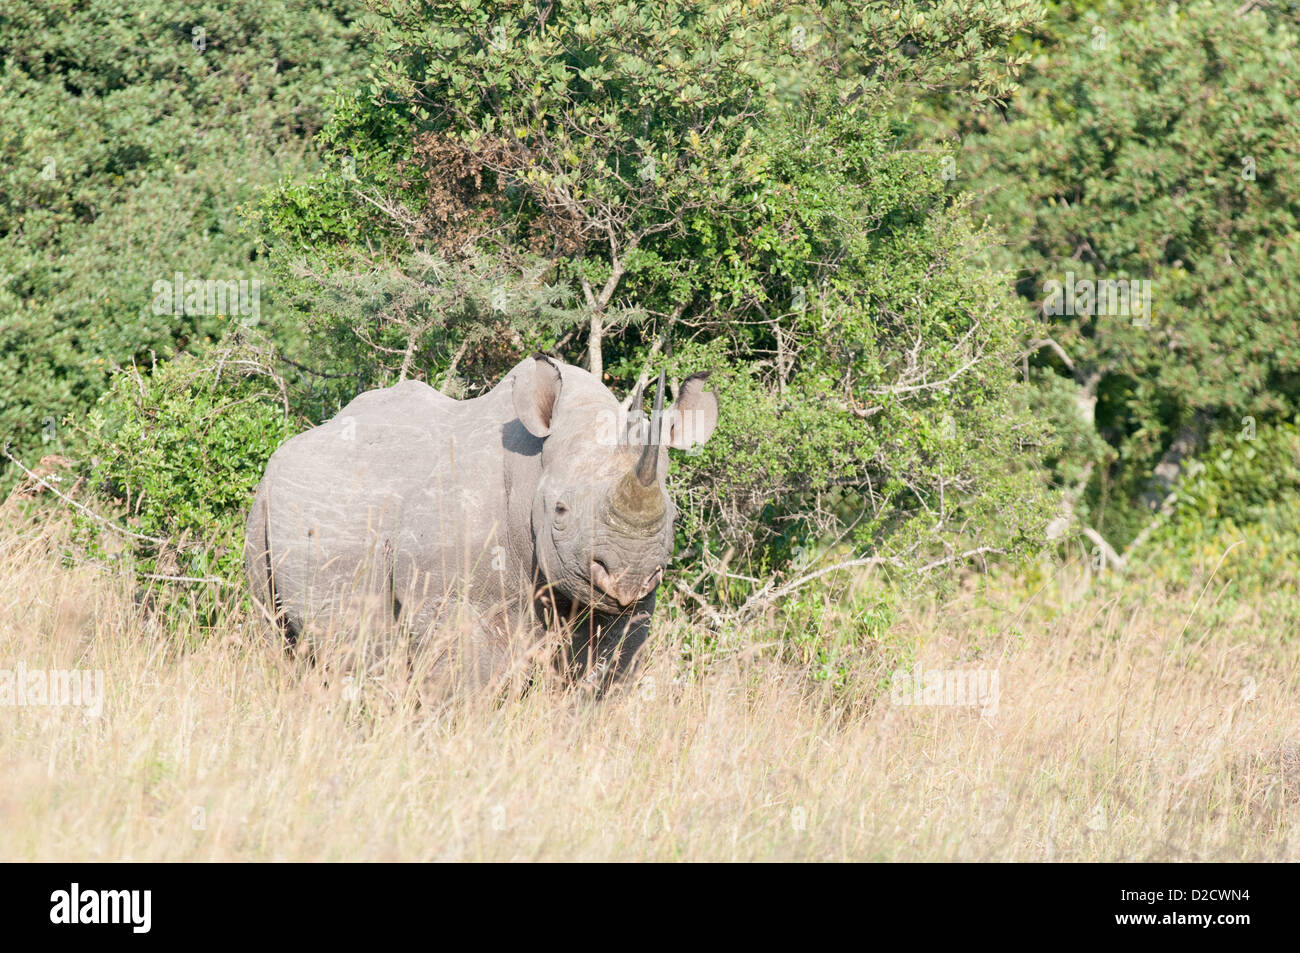 Black rhino moving in grass at the edge of a forest viewed from its front right. Stock Photo